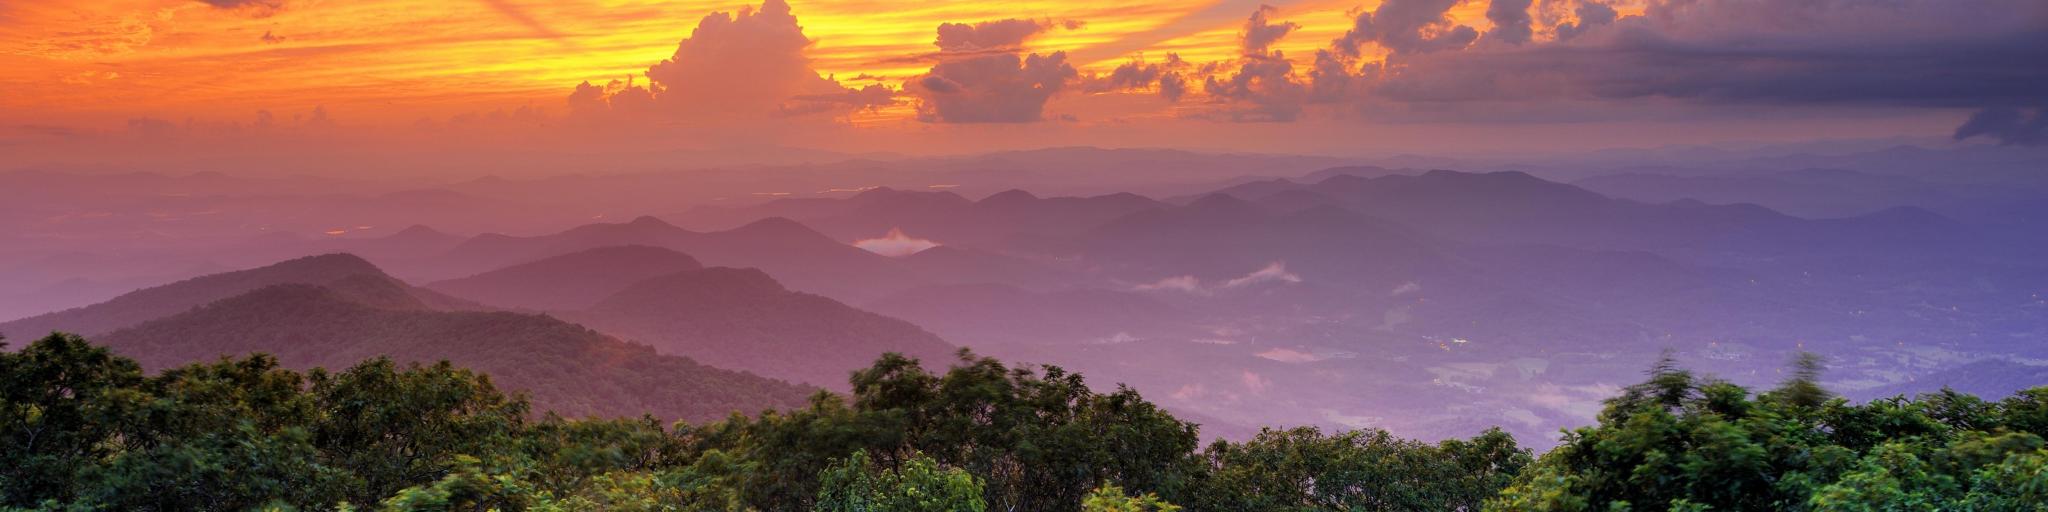 Georgia's Blue Ridge Mountains at sunset with trees in the foreground and an orange and purple sky above